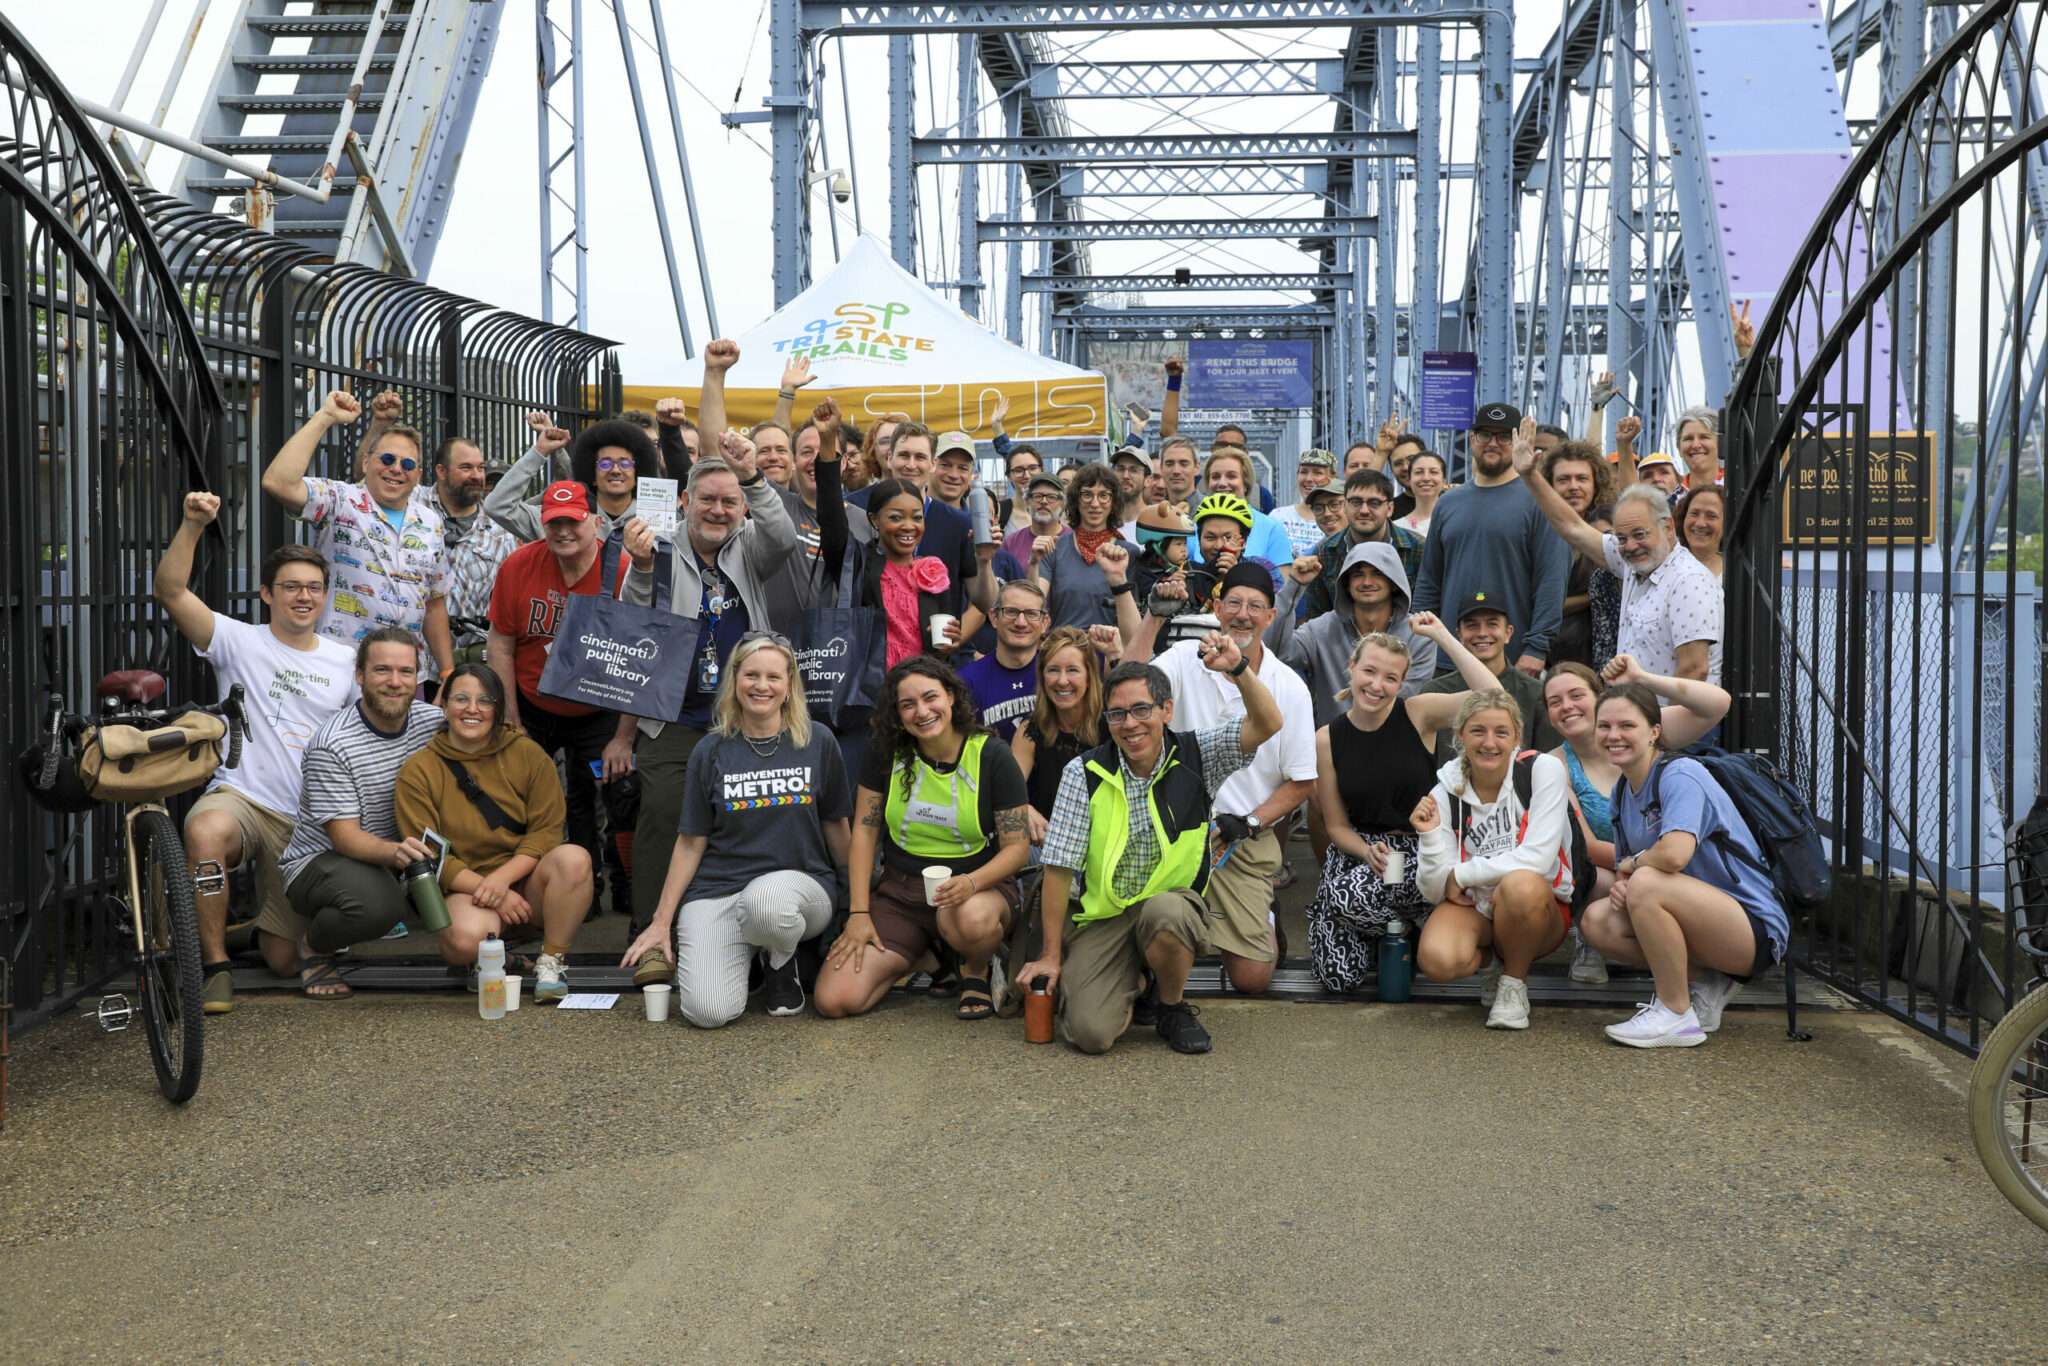 Group photo from 13th Annual Breakfast on the Bridge